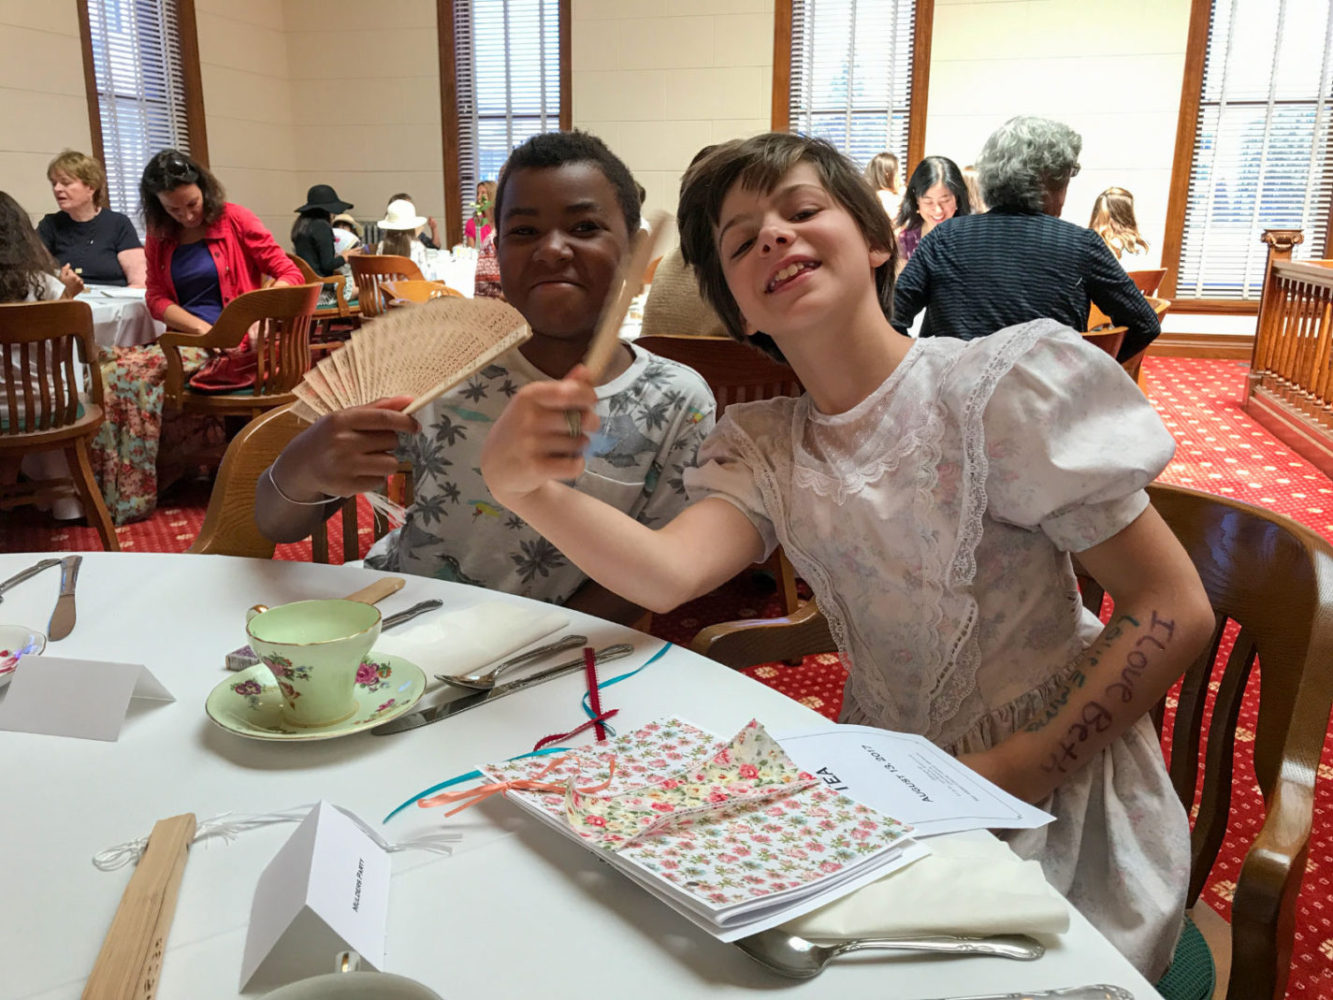 Two young visitors enjoy afternoon tea at Victorian Days at San Mateo County History Museum